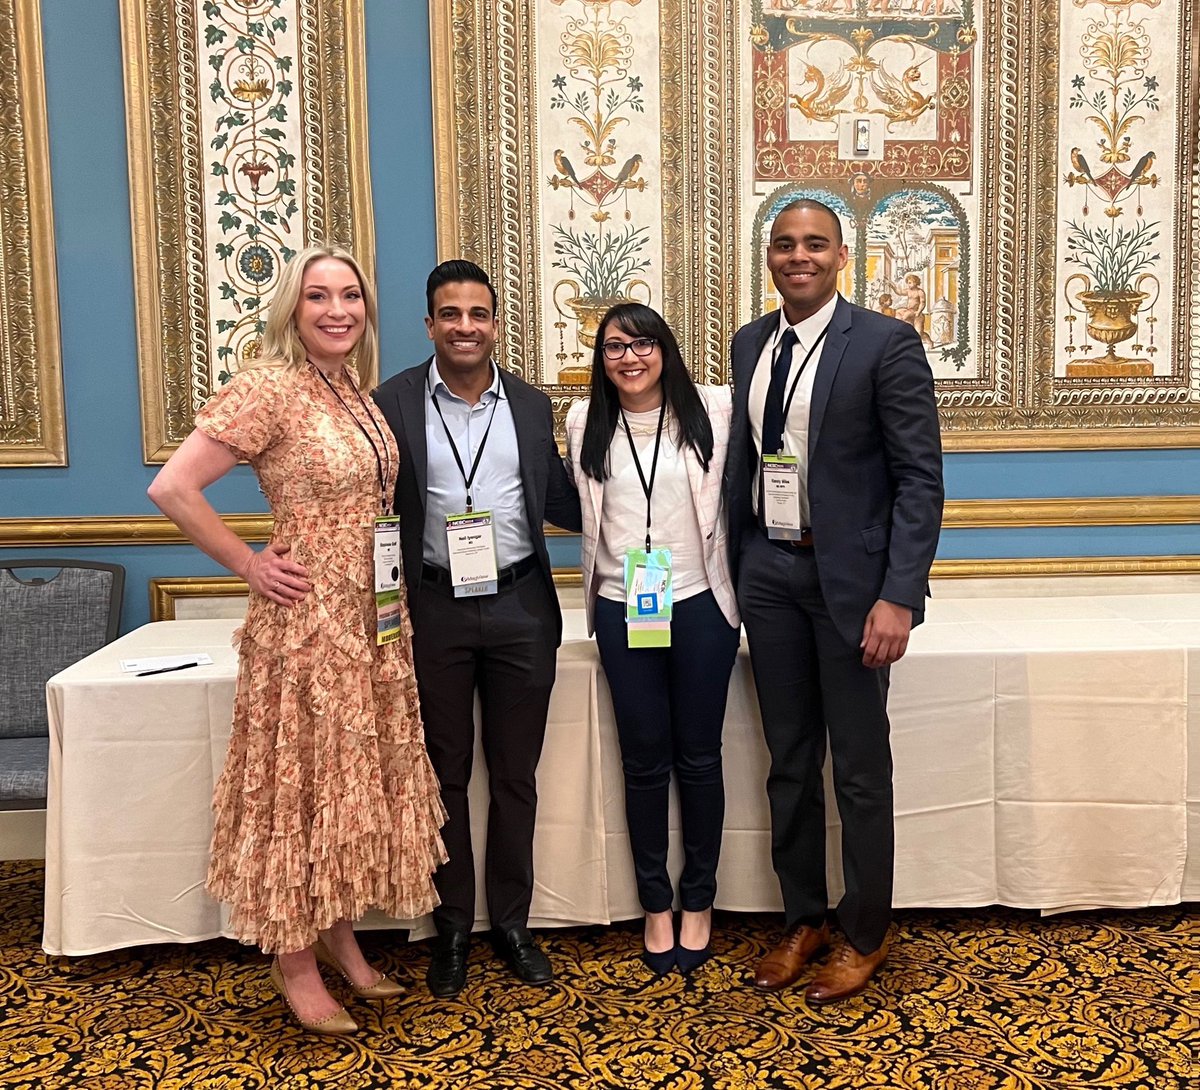 ✨The best faculty✨
#NCoBC2024 @NCBC_BreastCare @Neil_Iyengar @amykpatel @RMilesMD